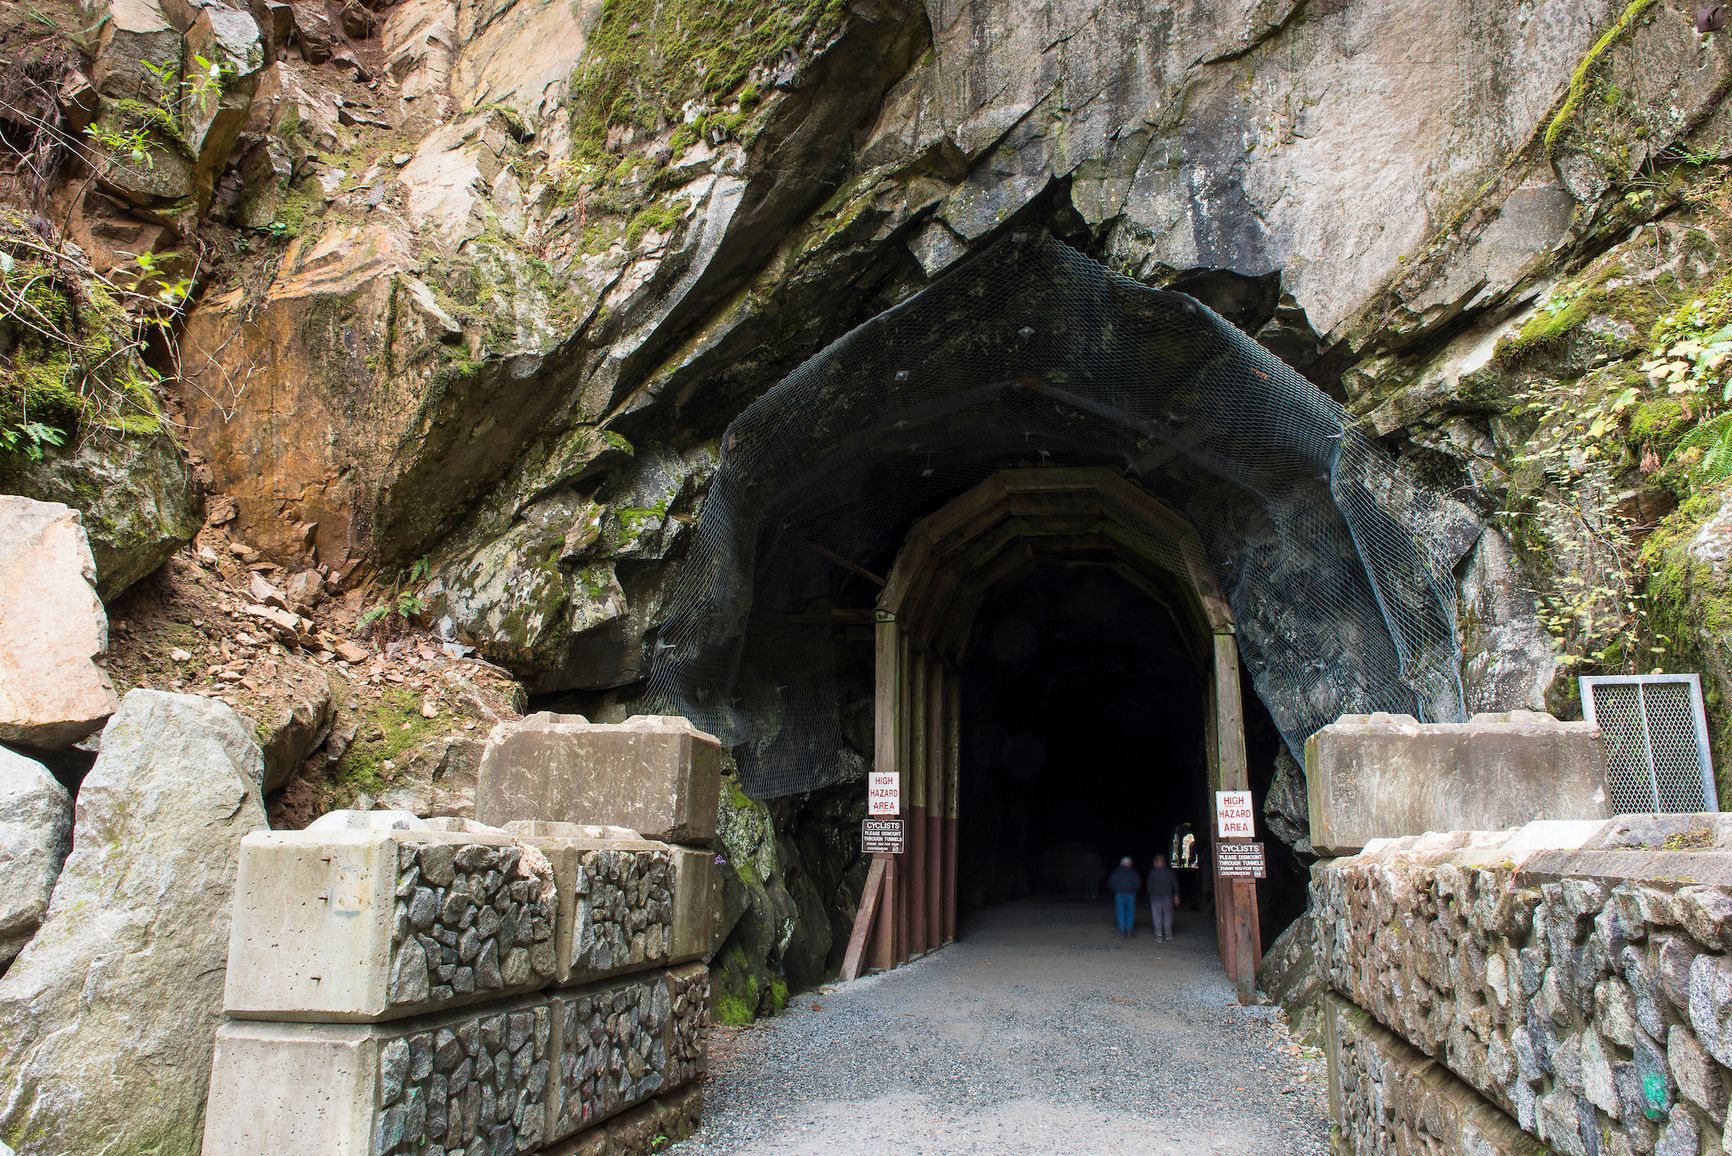 Othello tunnels are cut through solid granite and have interior supports of concrete and wood.&nbsp;